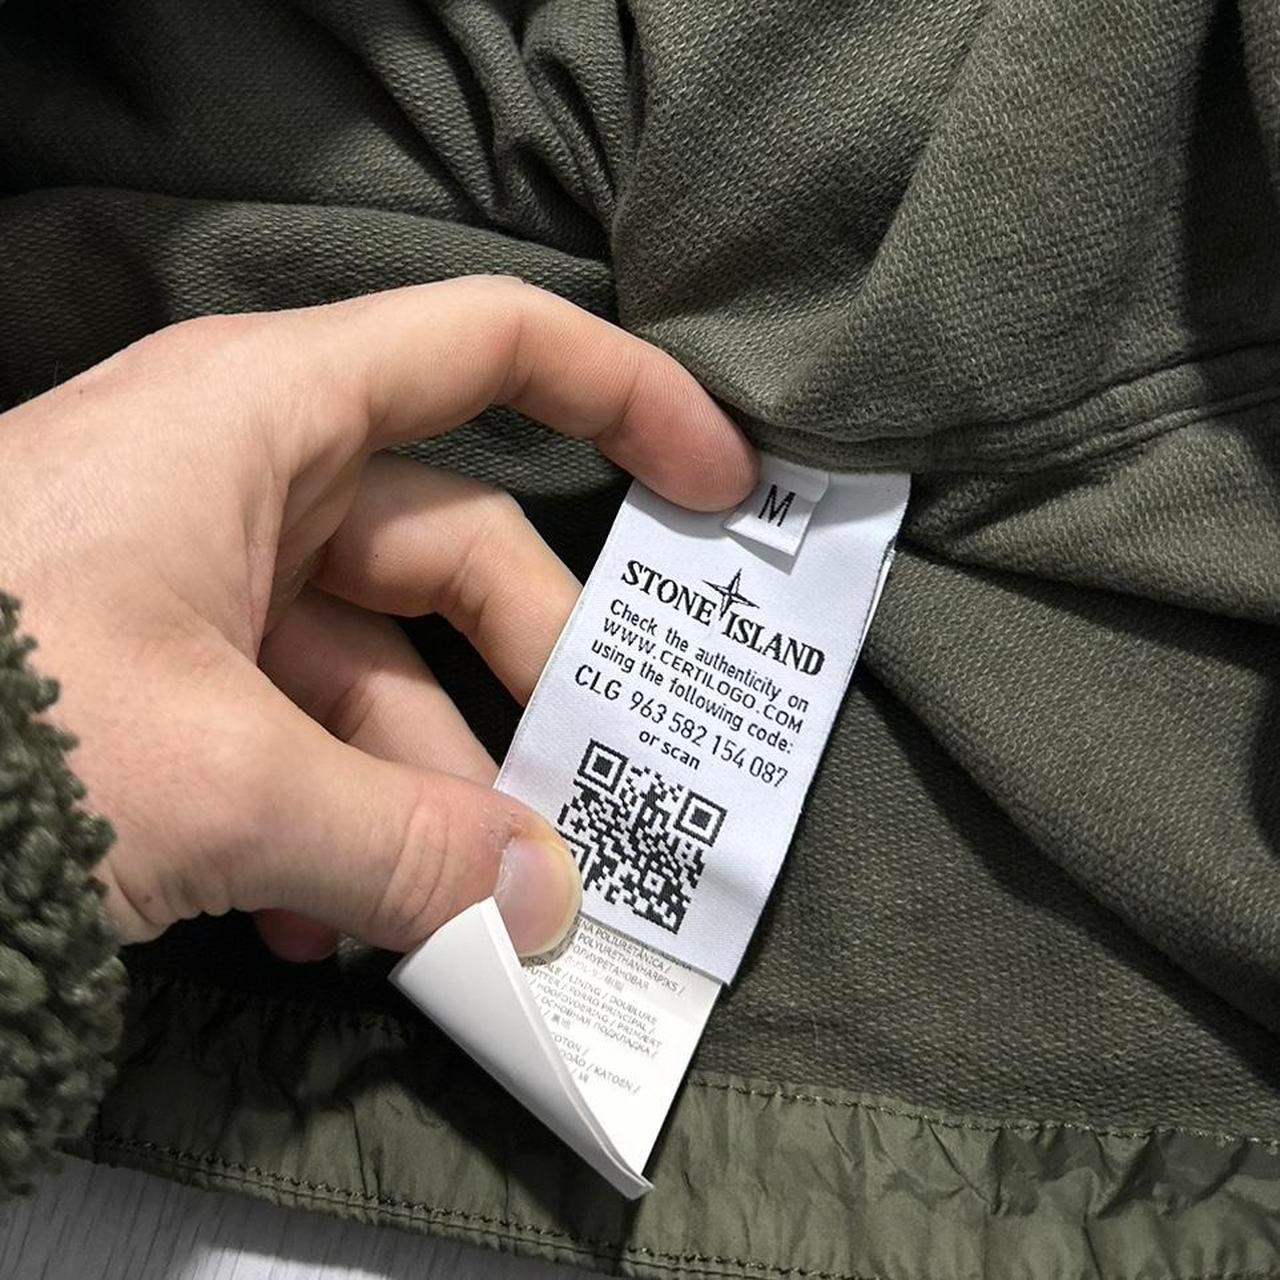 Stone Island Garment Dyed Crinkle Reps Overshirt - Known Source